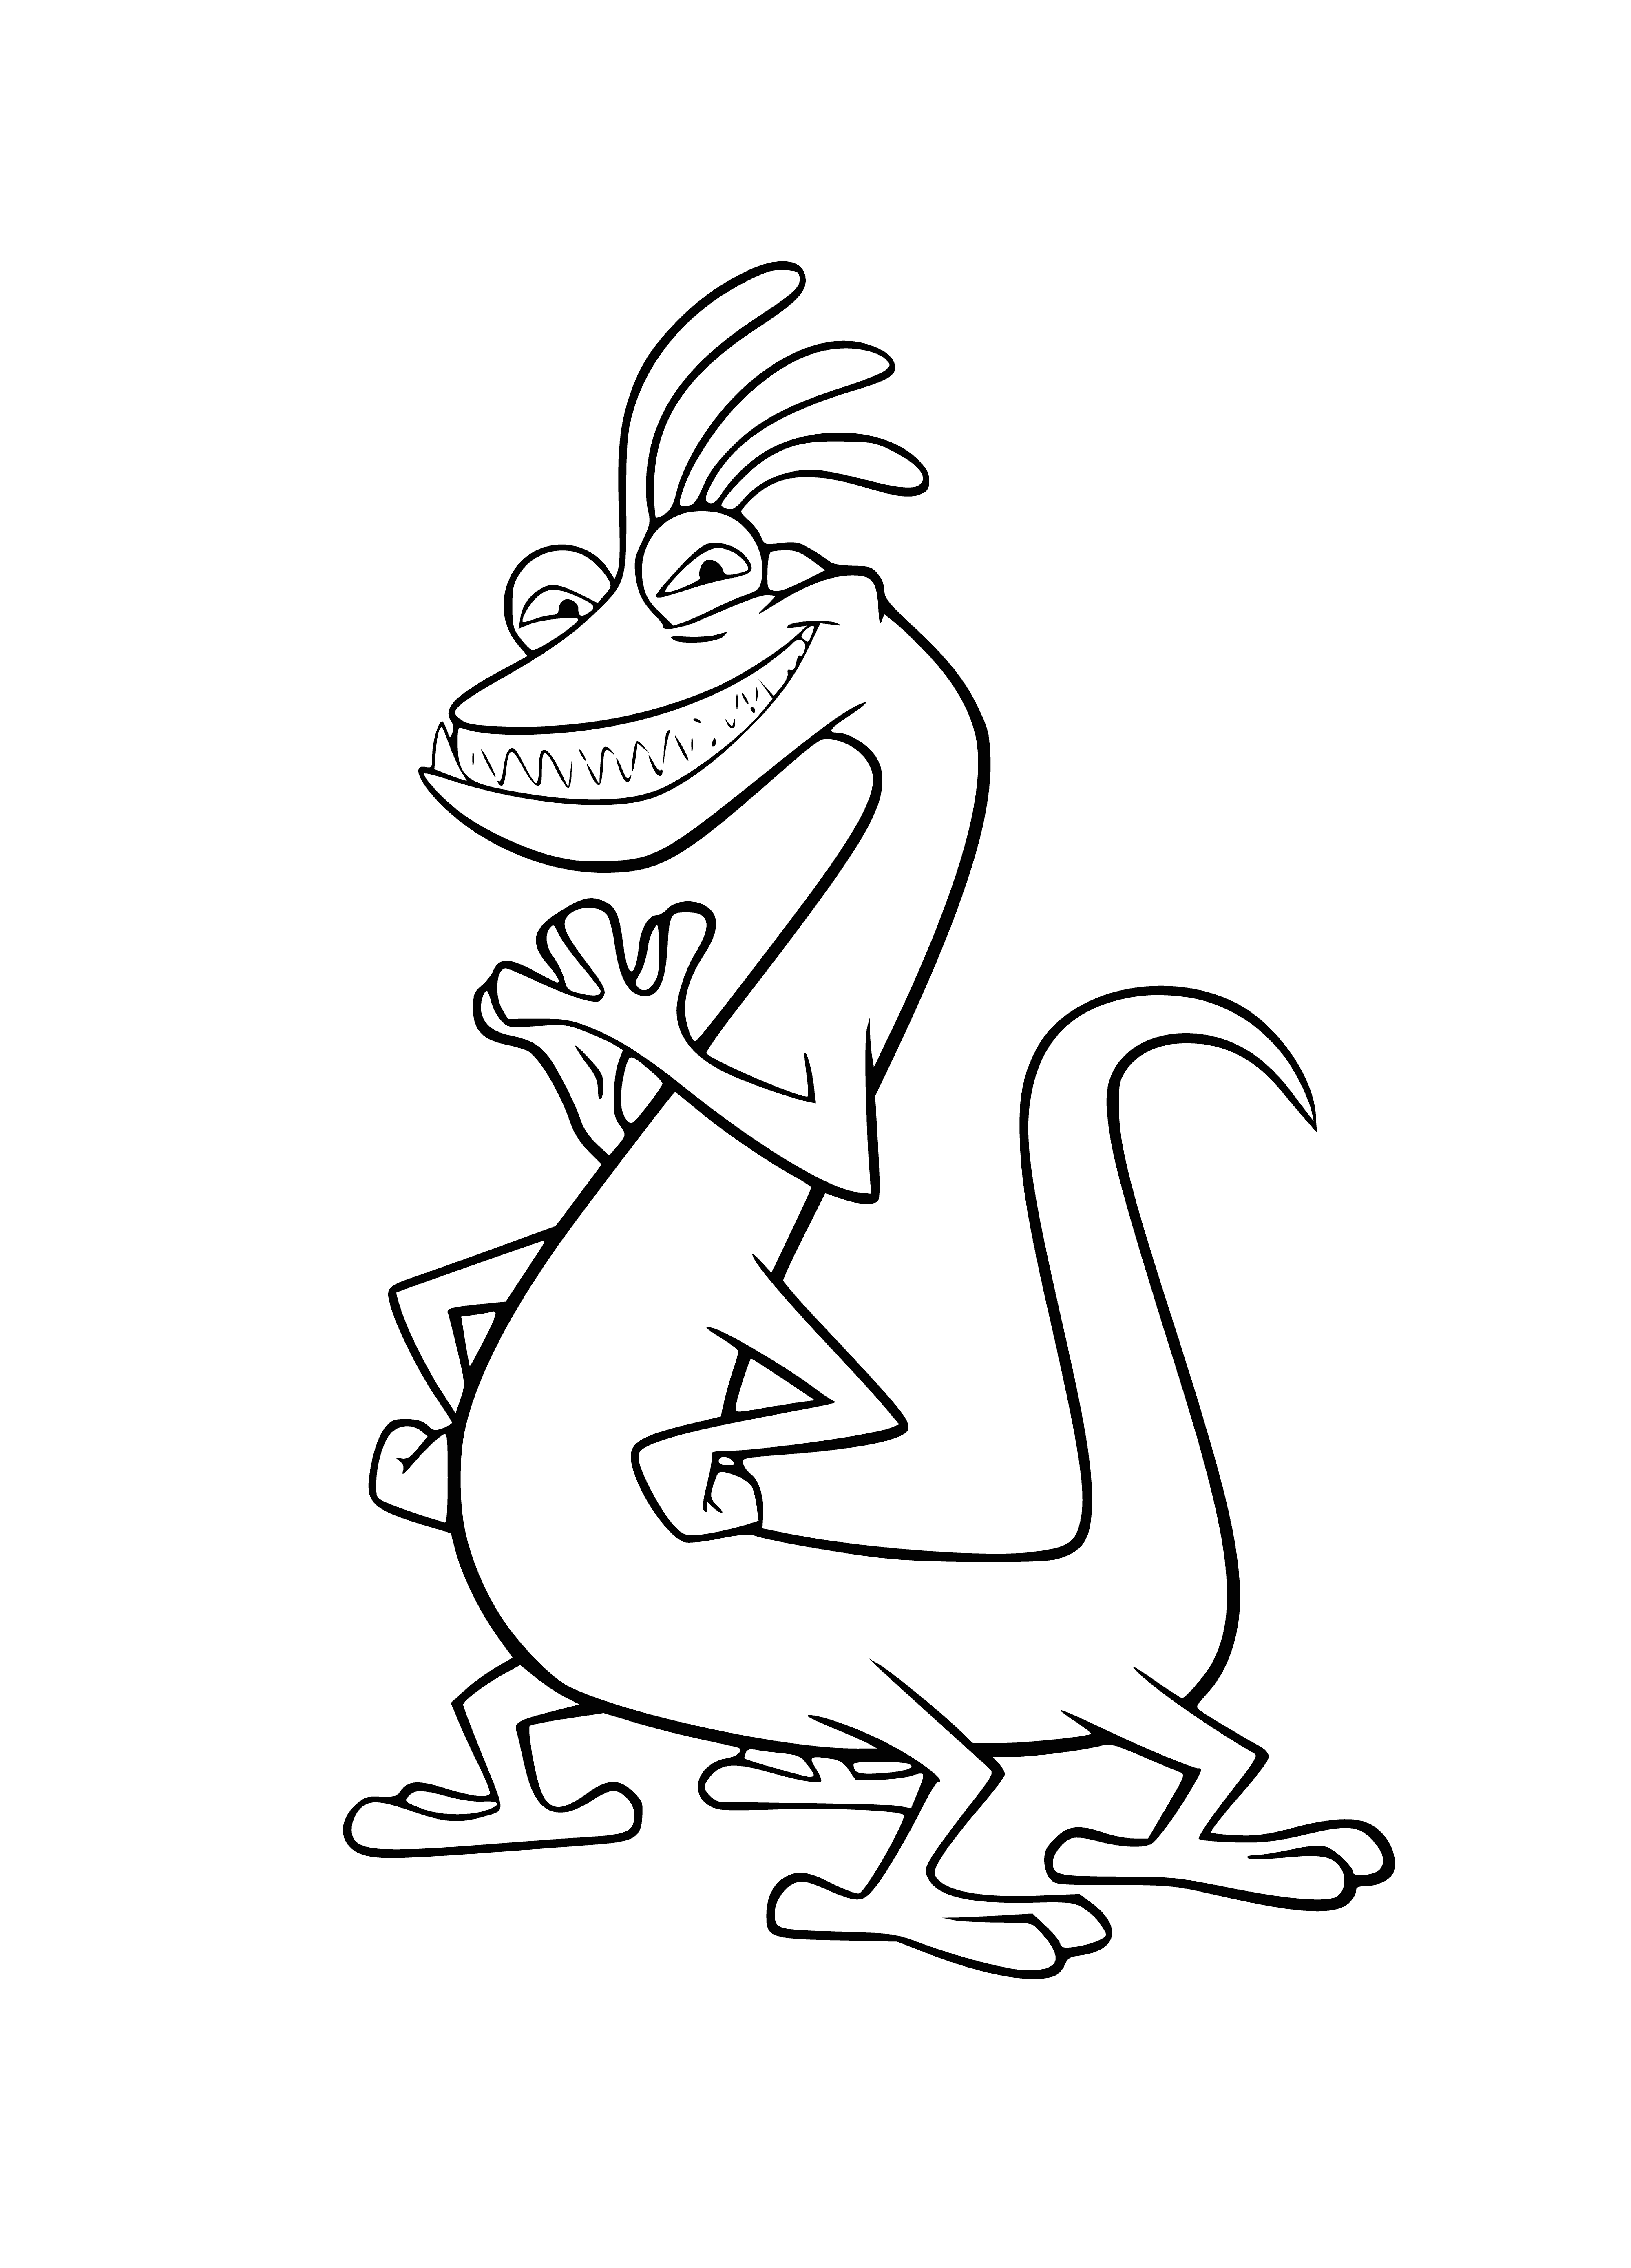 coloring page: Randel is a large furry monster with 4 eyes, a long nose & wearing white shirt/blue & purple striped tie, pants & two furry ears.